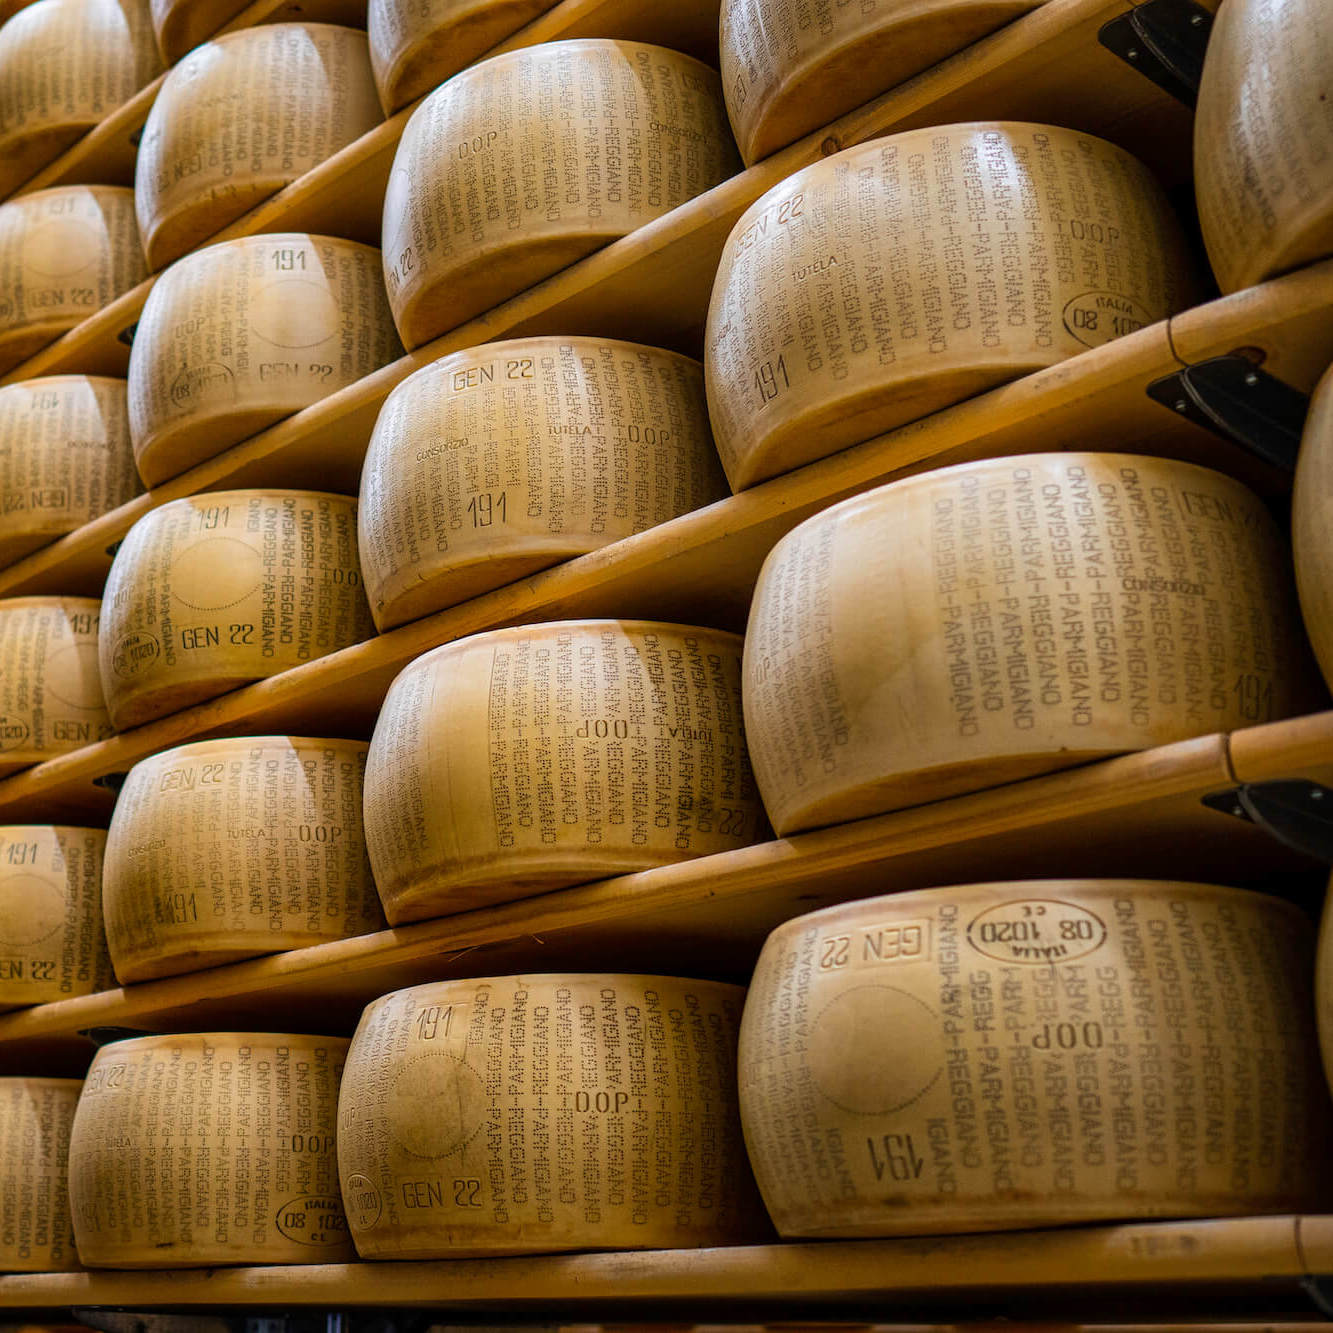 Parmigiano Reggiano DOP Whole and Half Cheese Wheels 72 Months / Whole Wheel 80/88 lbs (36/40 kg)